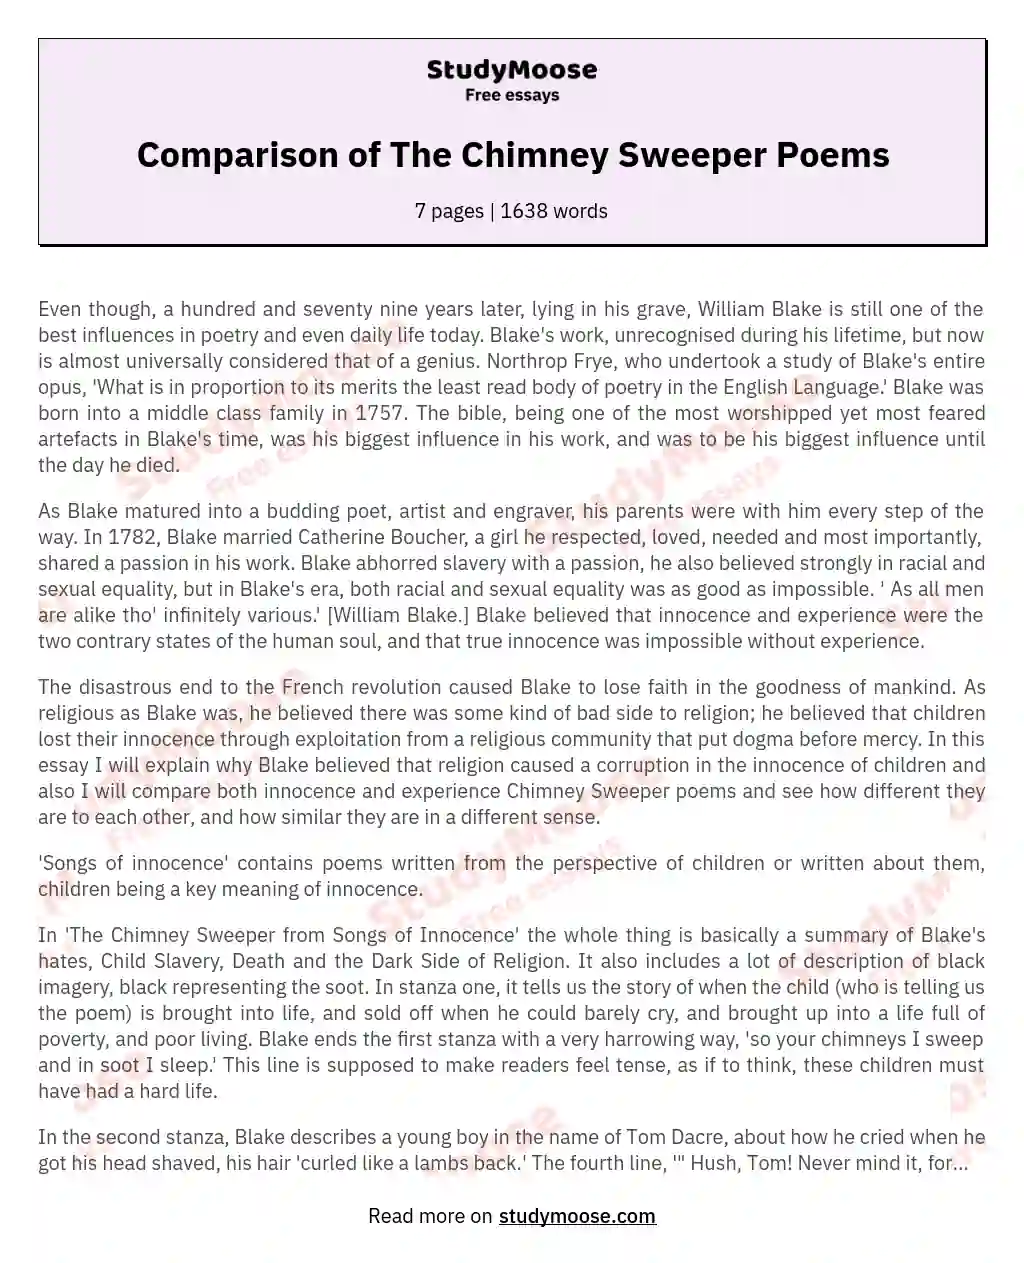 Comparison of The Chimney Sweeper Poems essay